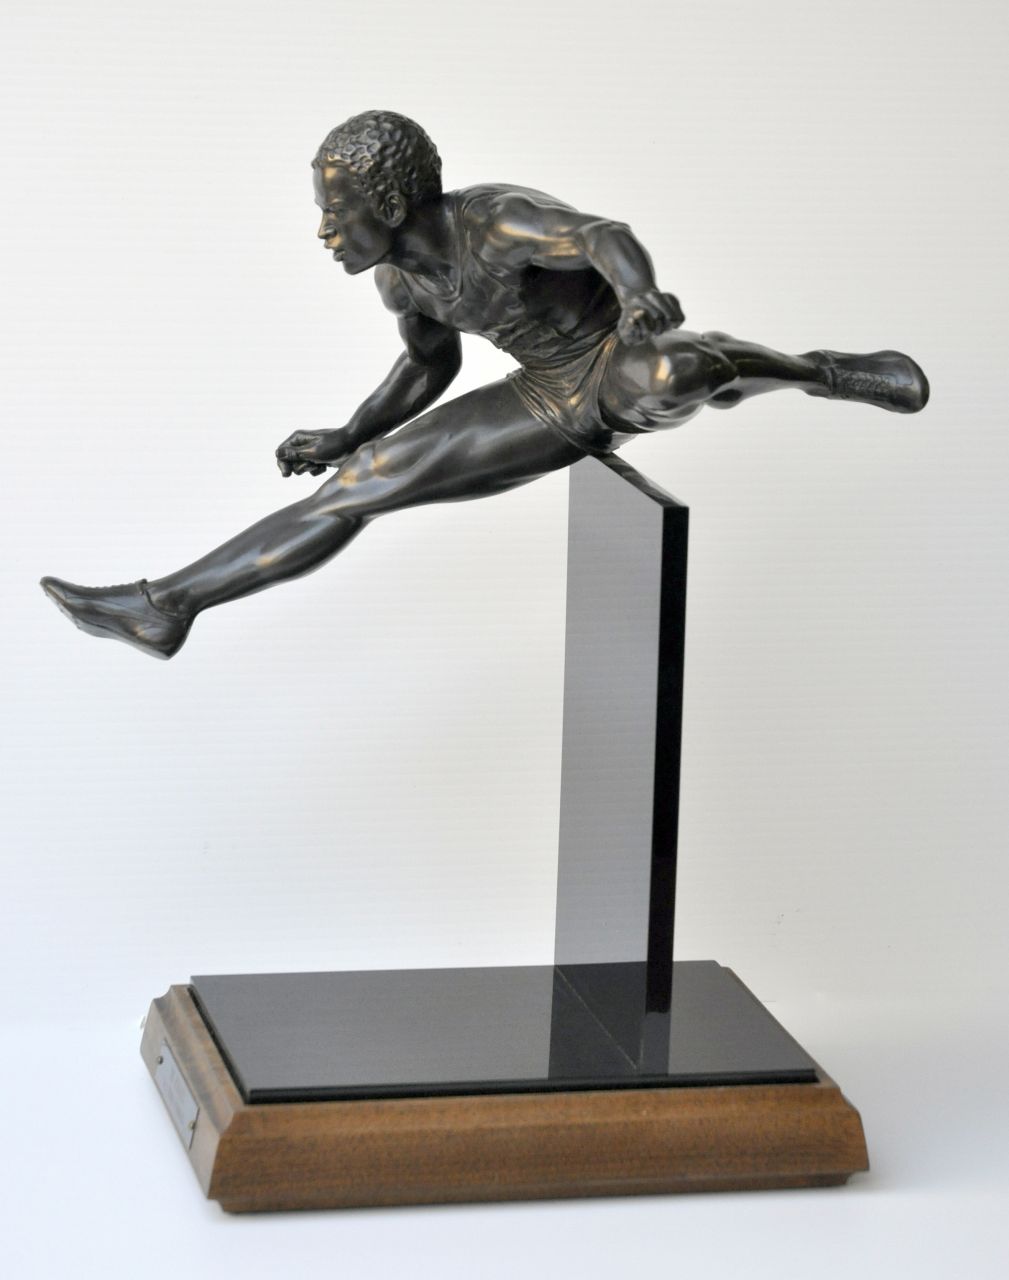 Schomberg A.T.  | Auldwil 'Thomas' Schomberg, The Hurdler, bronze and acrylic 46.1 x 22.0 cm, signed on the left foot, no. 8/18 and dated 1984